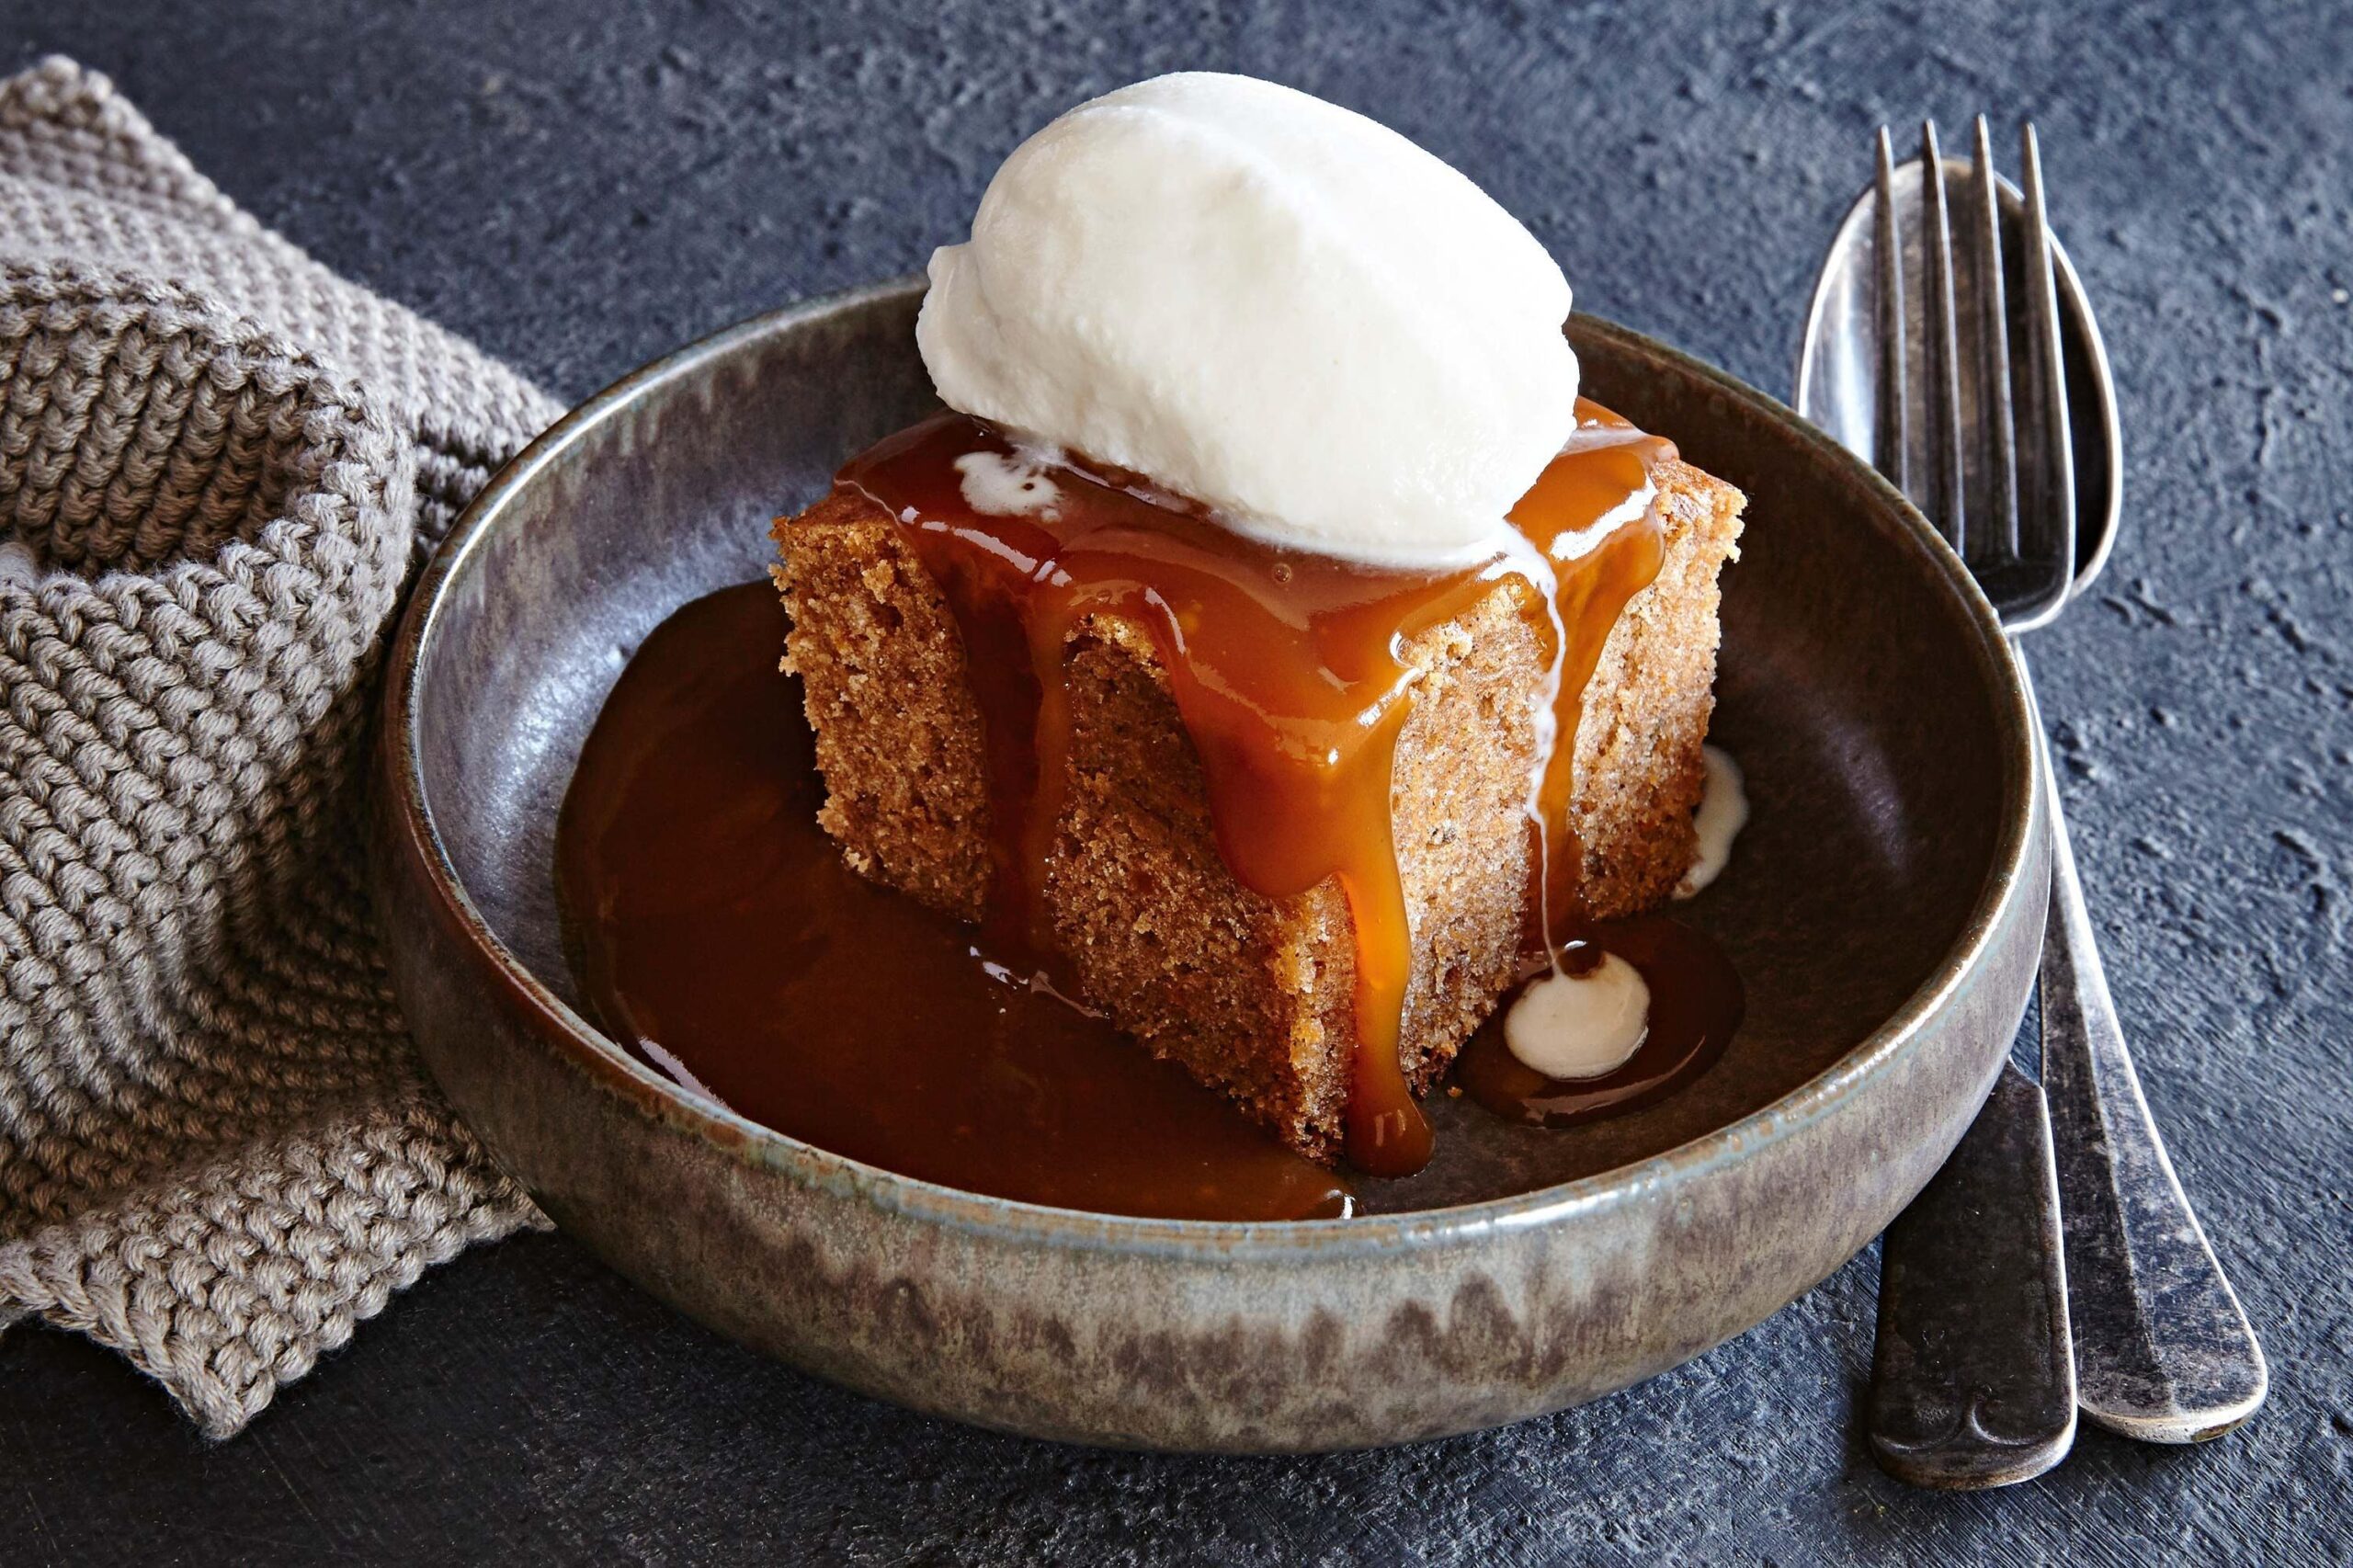  This cozy dessert is worth the wait!